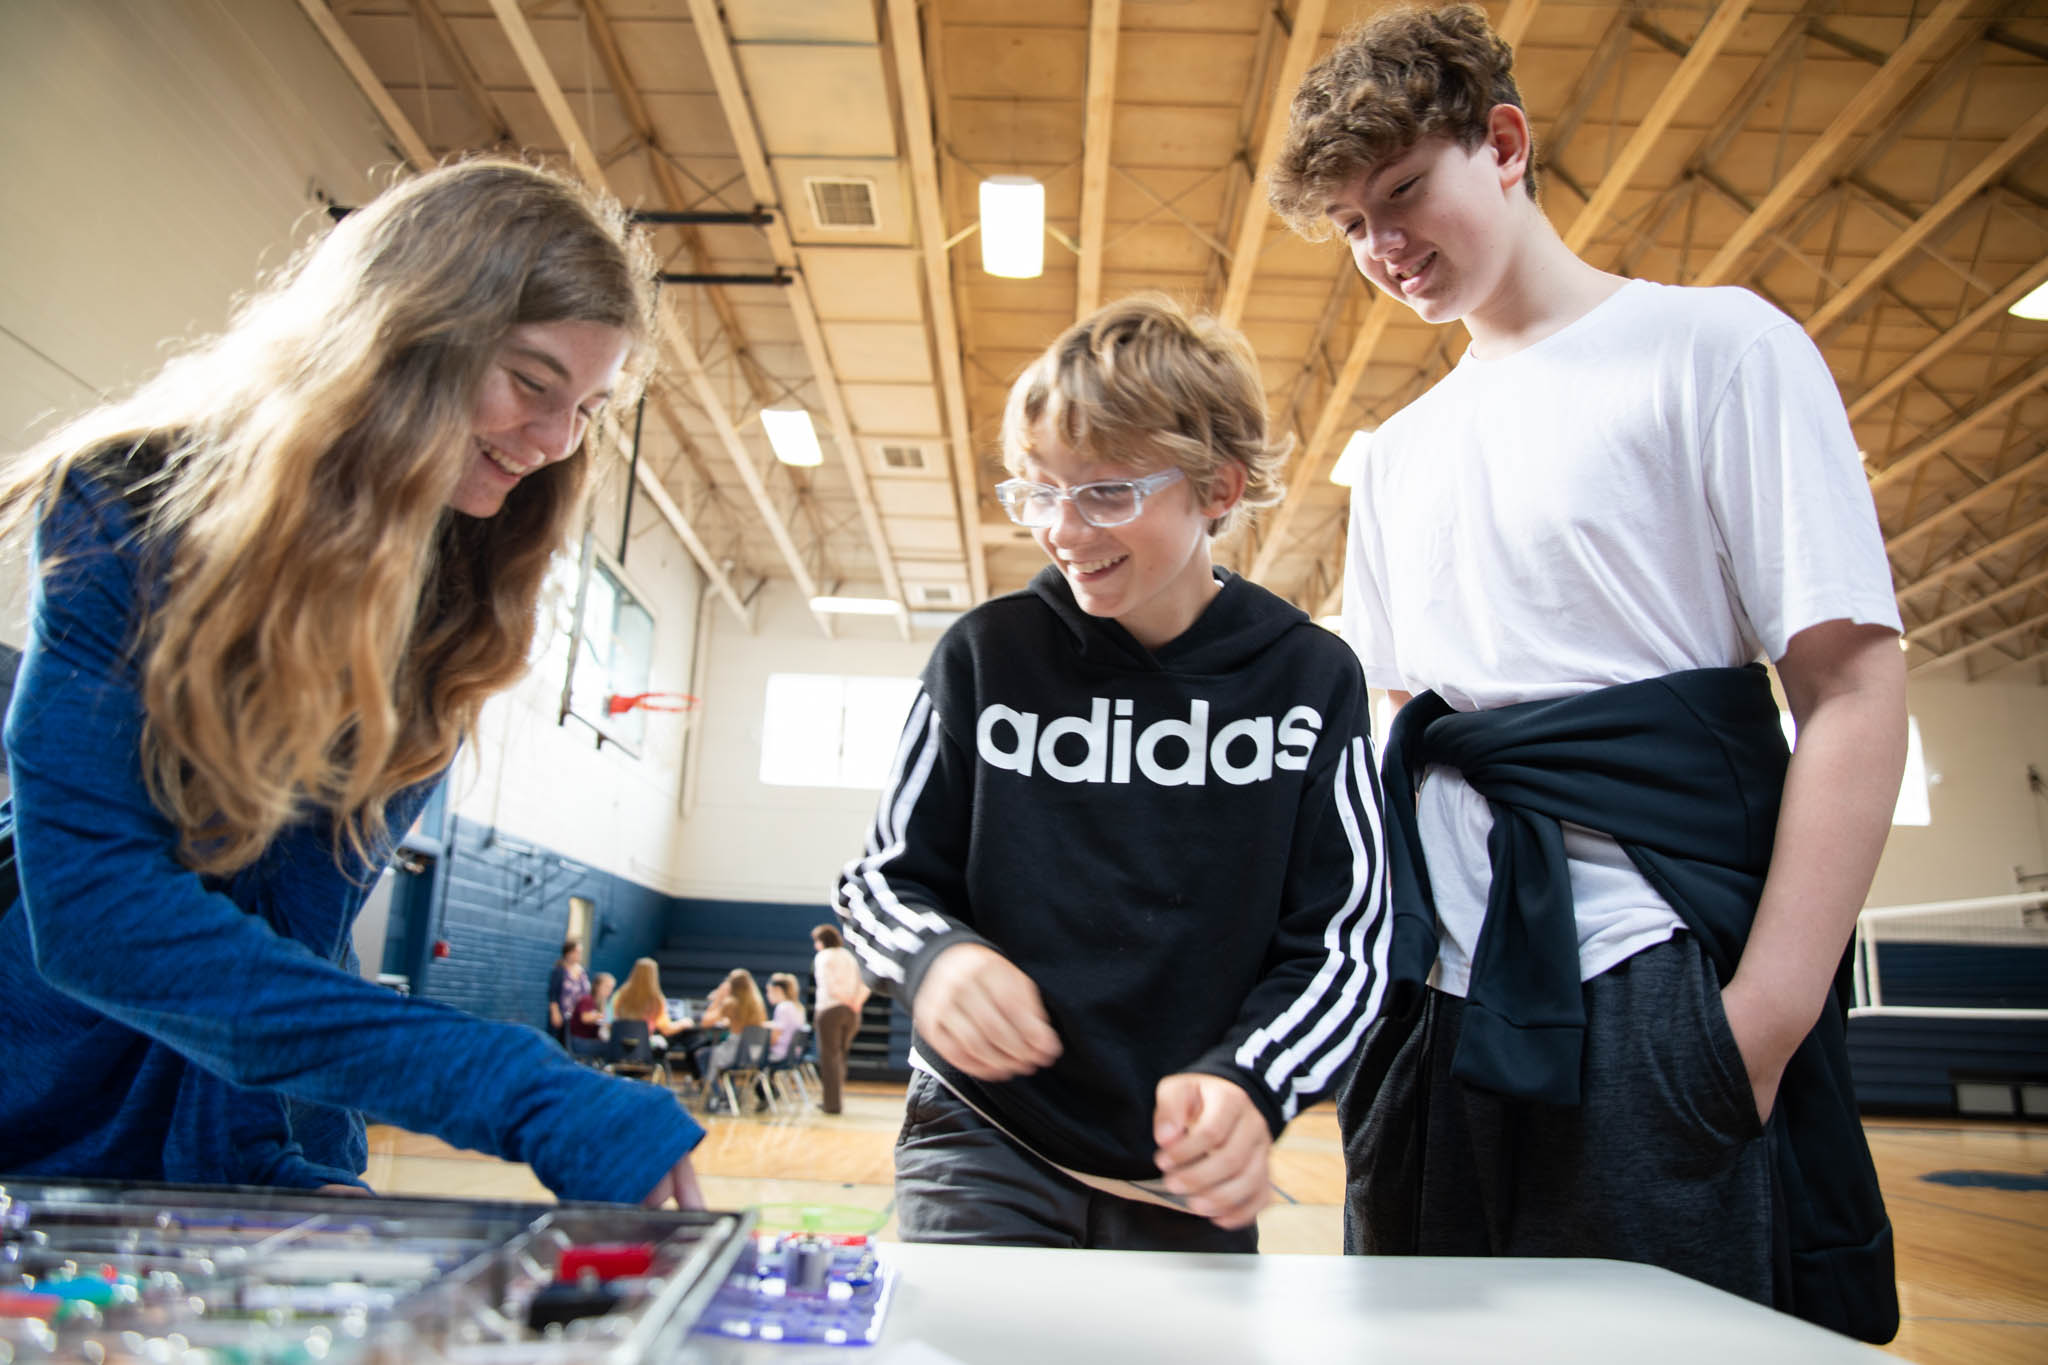 Three students work on an electrical circuit board kit and laugh.